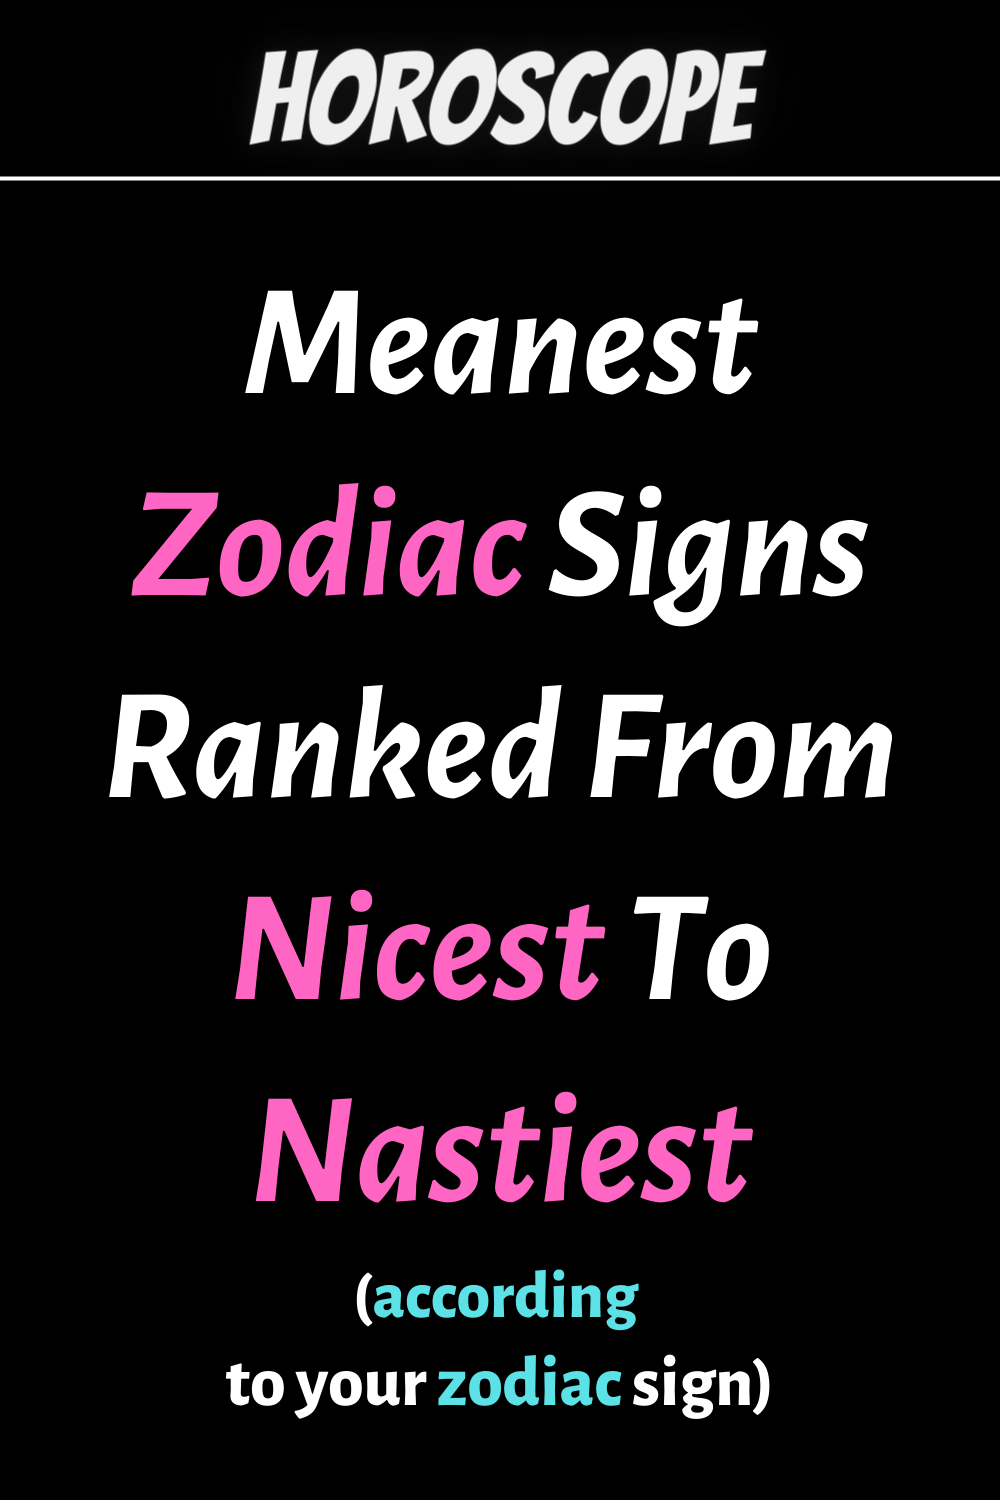 Meanest Zodiac Signs Ranked From Nicest To Nastiest | zodiac Signs